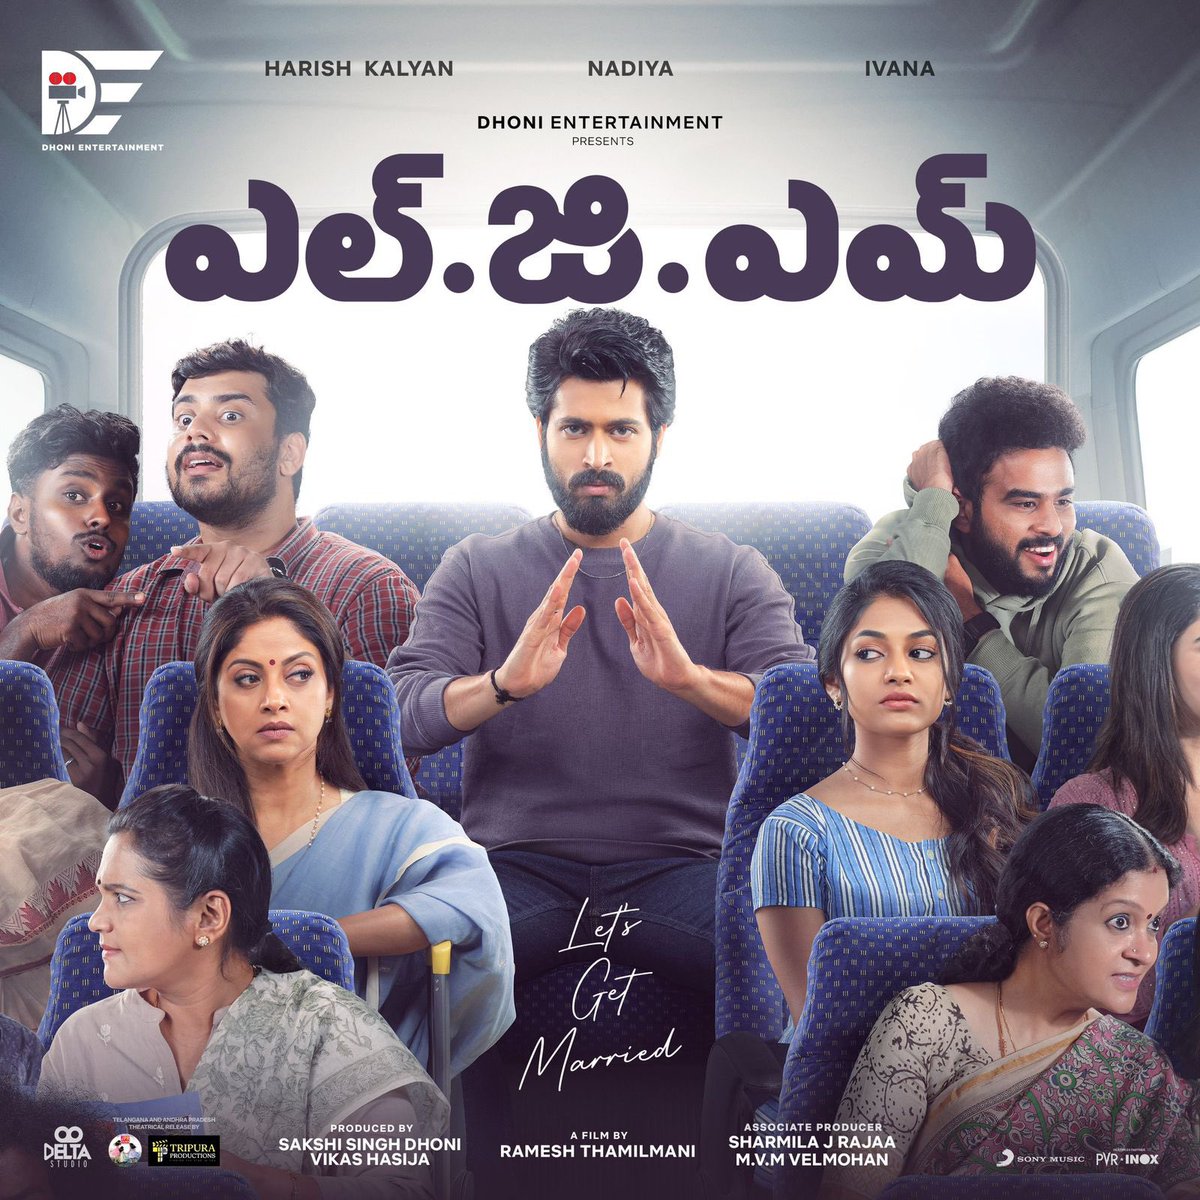 Just watched #LGMMovie - an absolute blast of a film! It's a rollercoaster of laughs, action, and heartwarming moments. A big shoutout to director @Ramesharchi garu and the incredible team behind it. Congratulations on your well-deserved success! @DhoniLtd @msdhoni